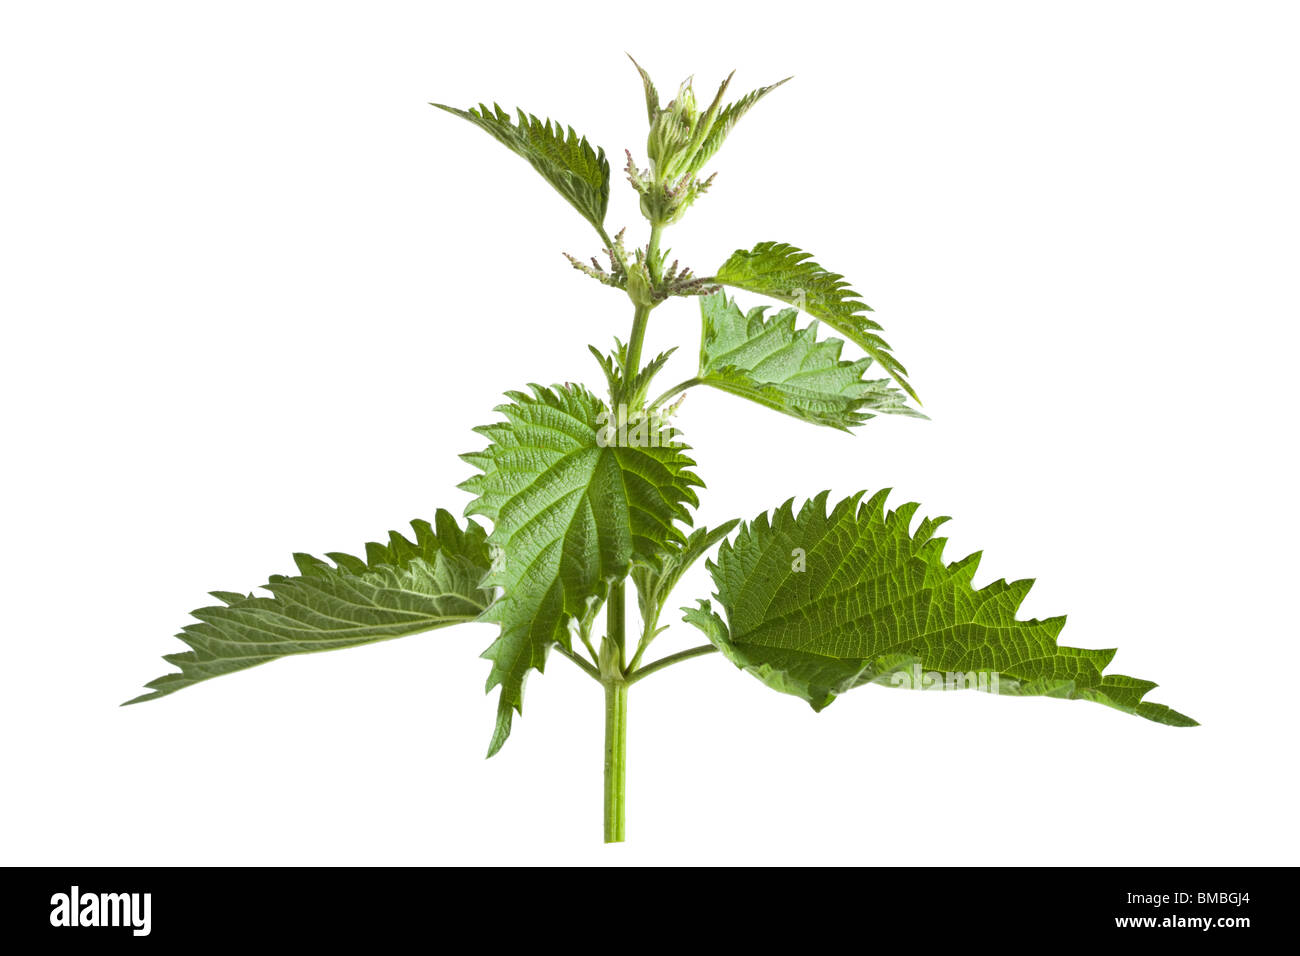 Stinging nettle (Common nettle), Urtica dioica. Stock Photo